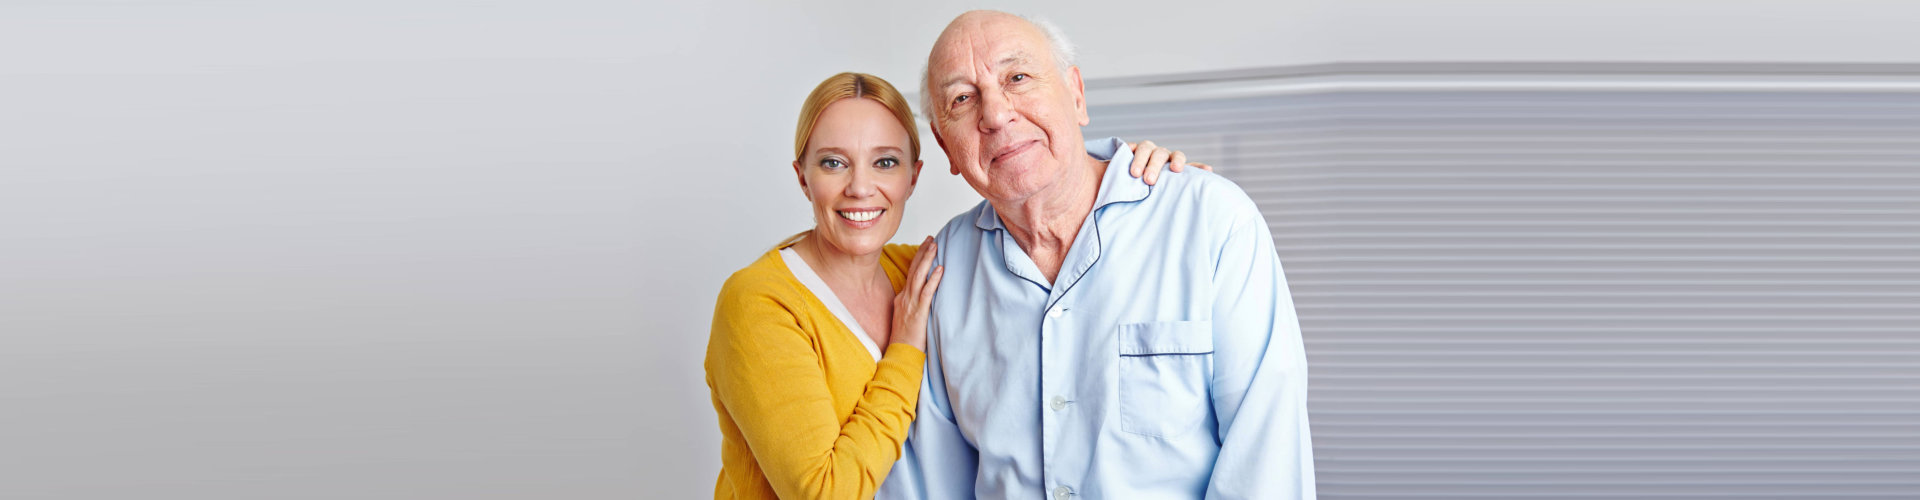 elderly person and caregiver smiling